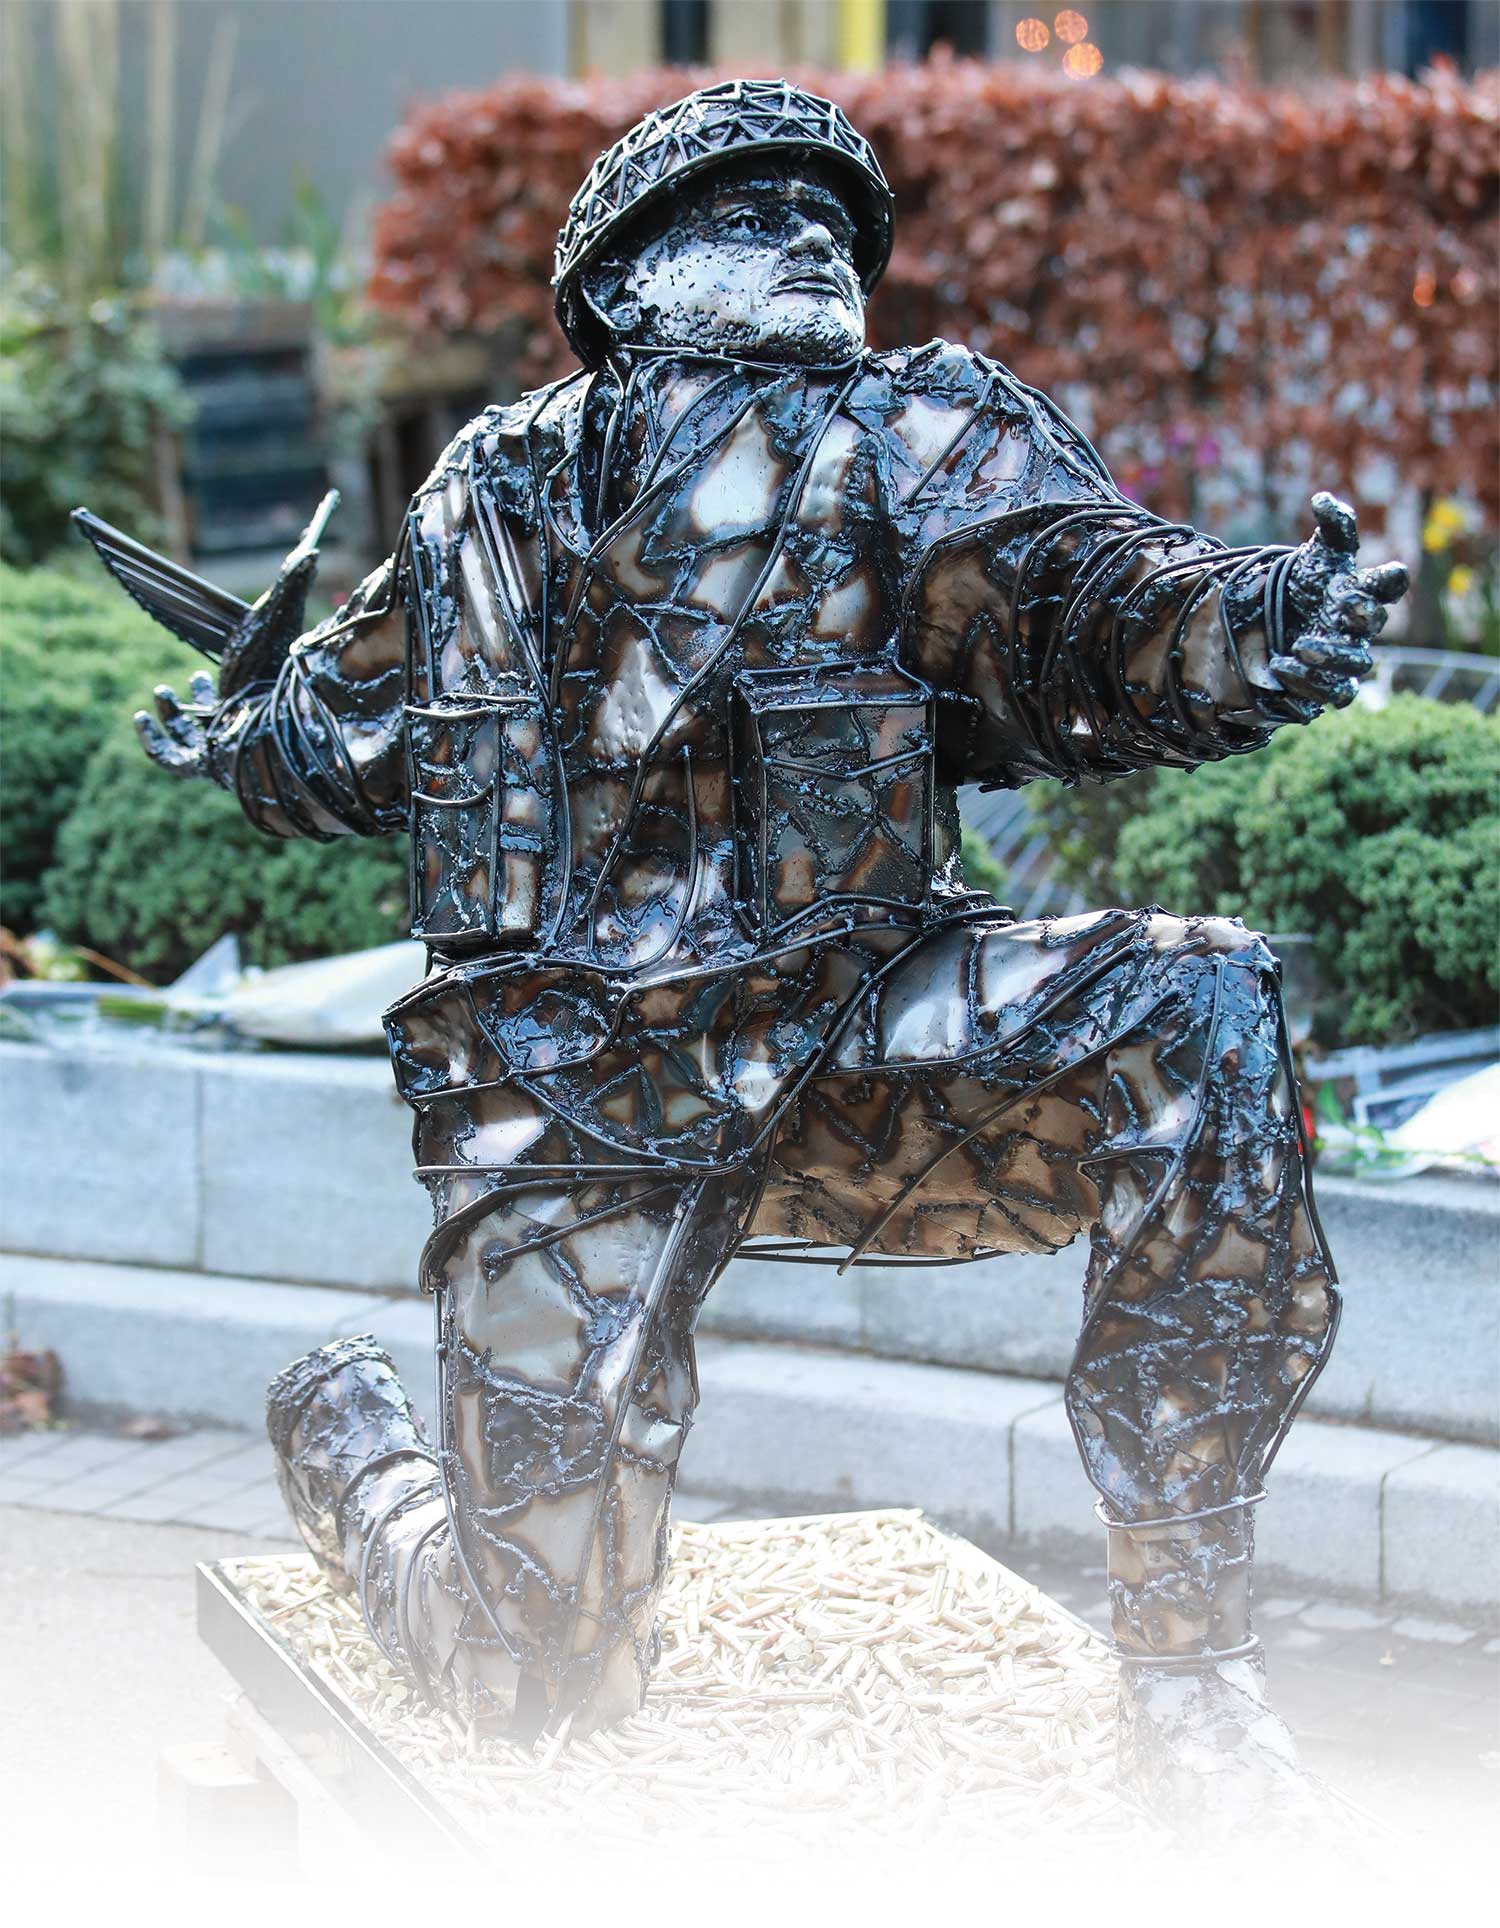 The Soldiers of Sacrifice sculpture by ALFIE BRADLEY